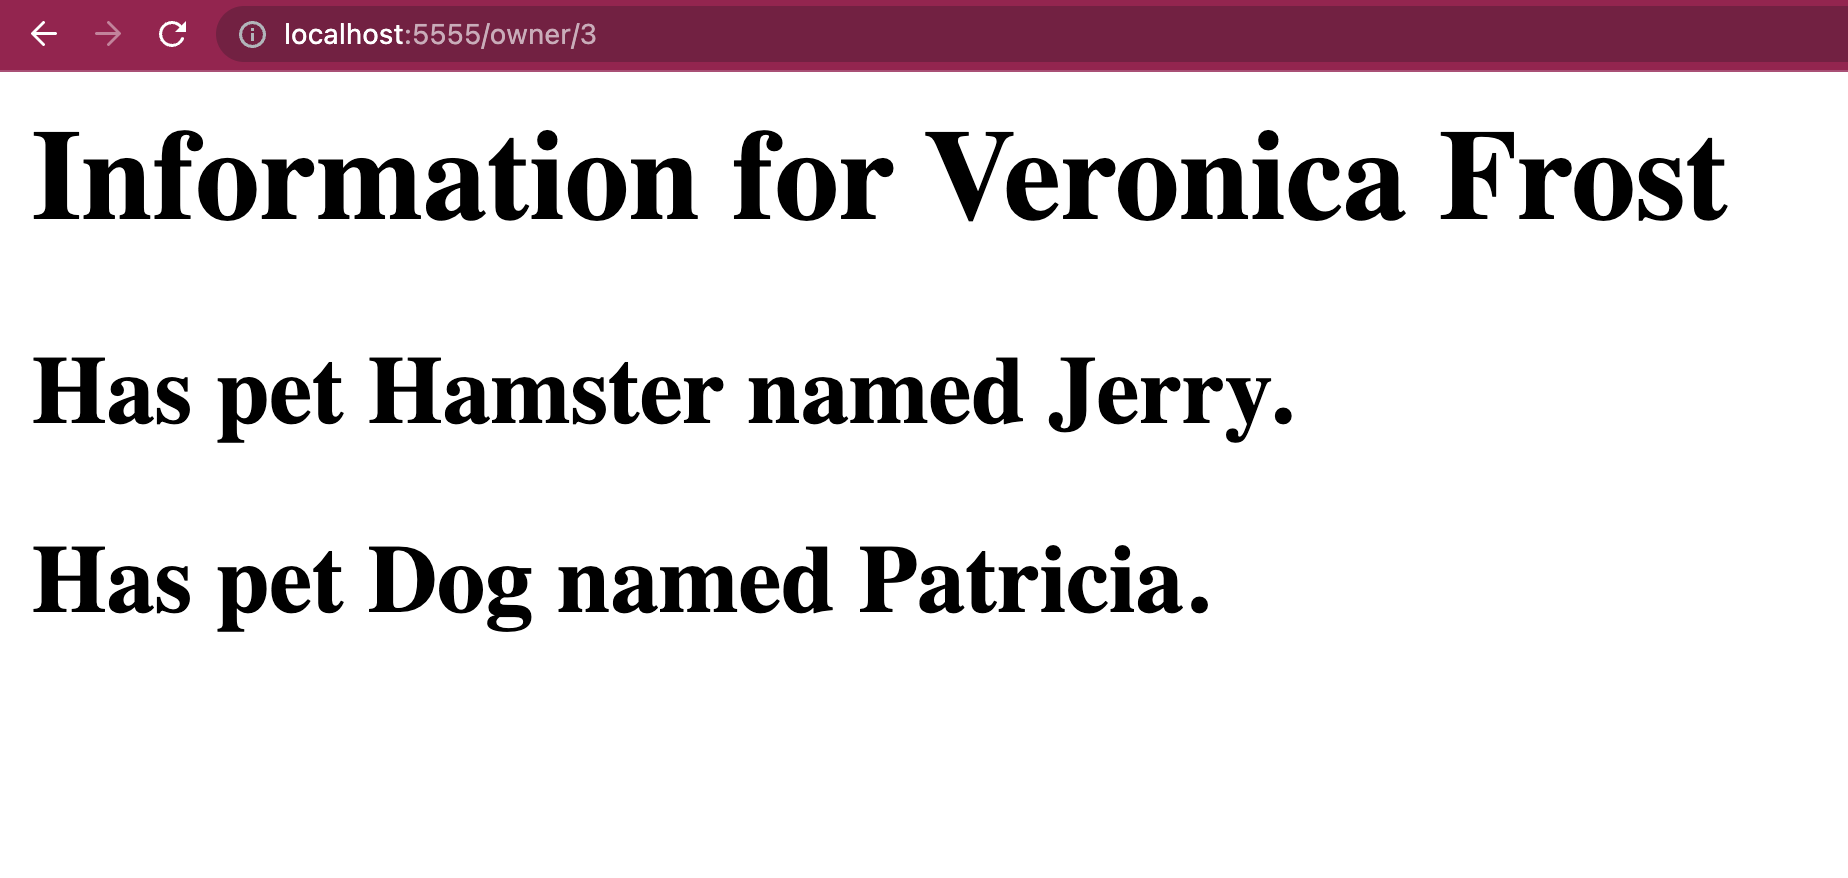 Veronica Frost has a hamster named Jerry and a Dog named Patricia